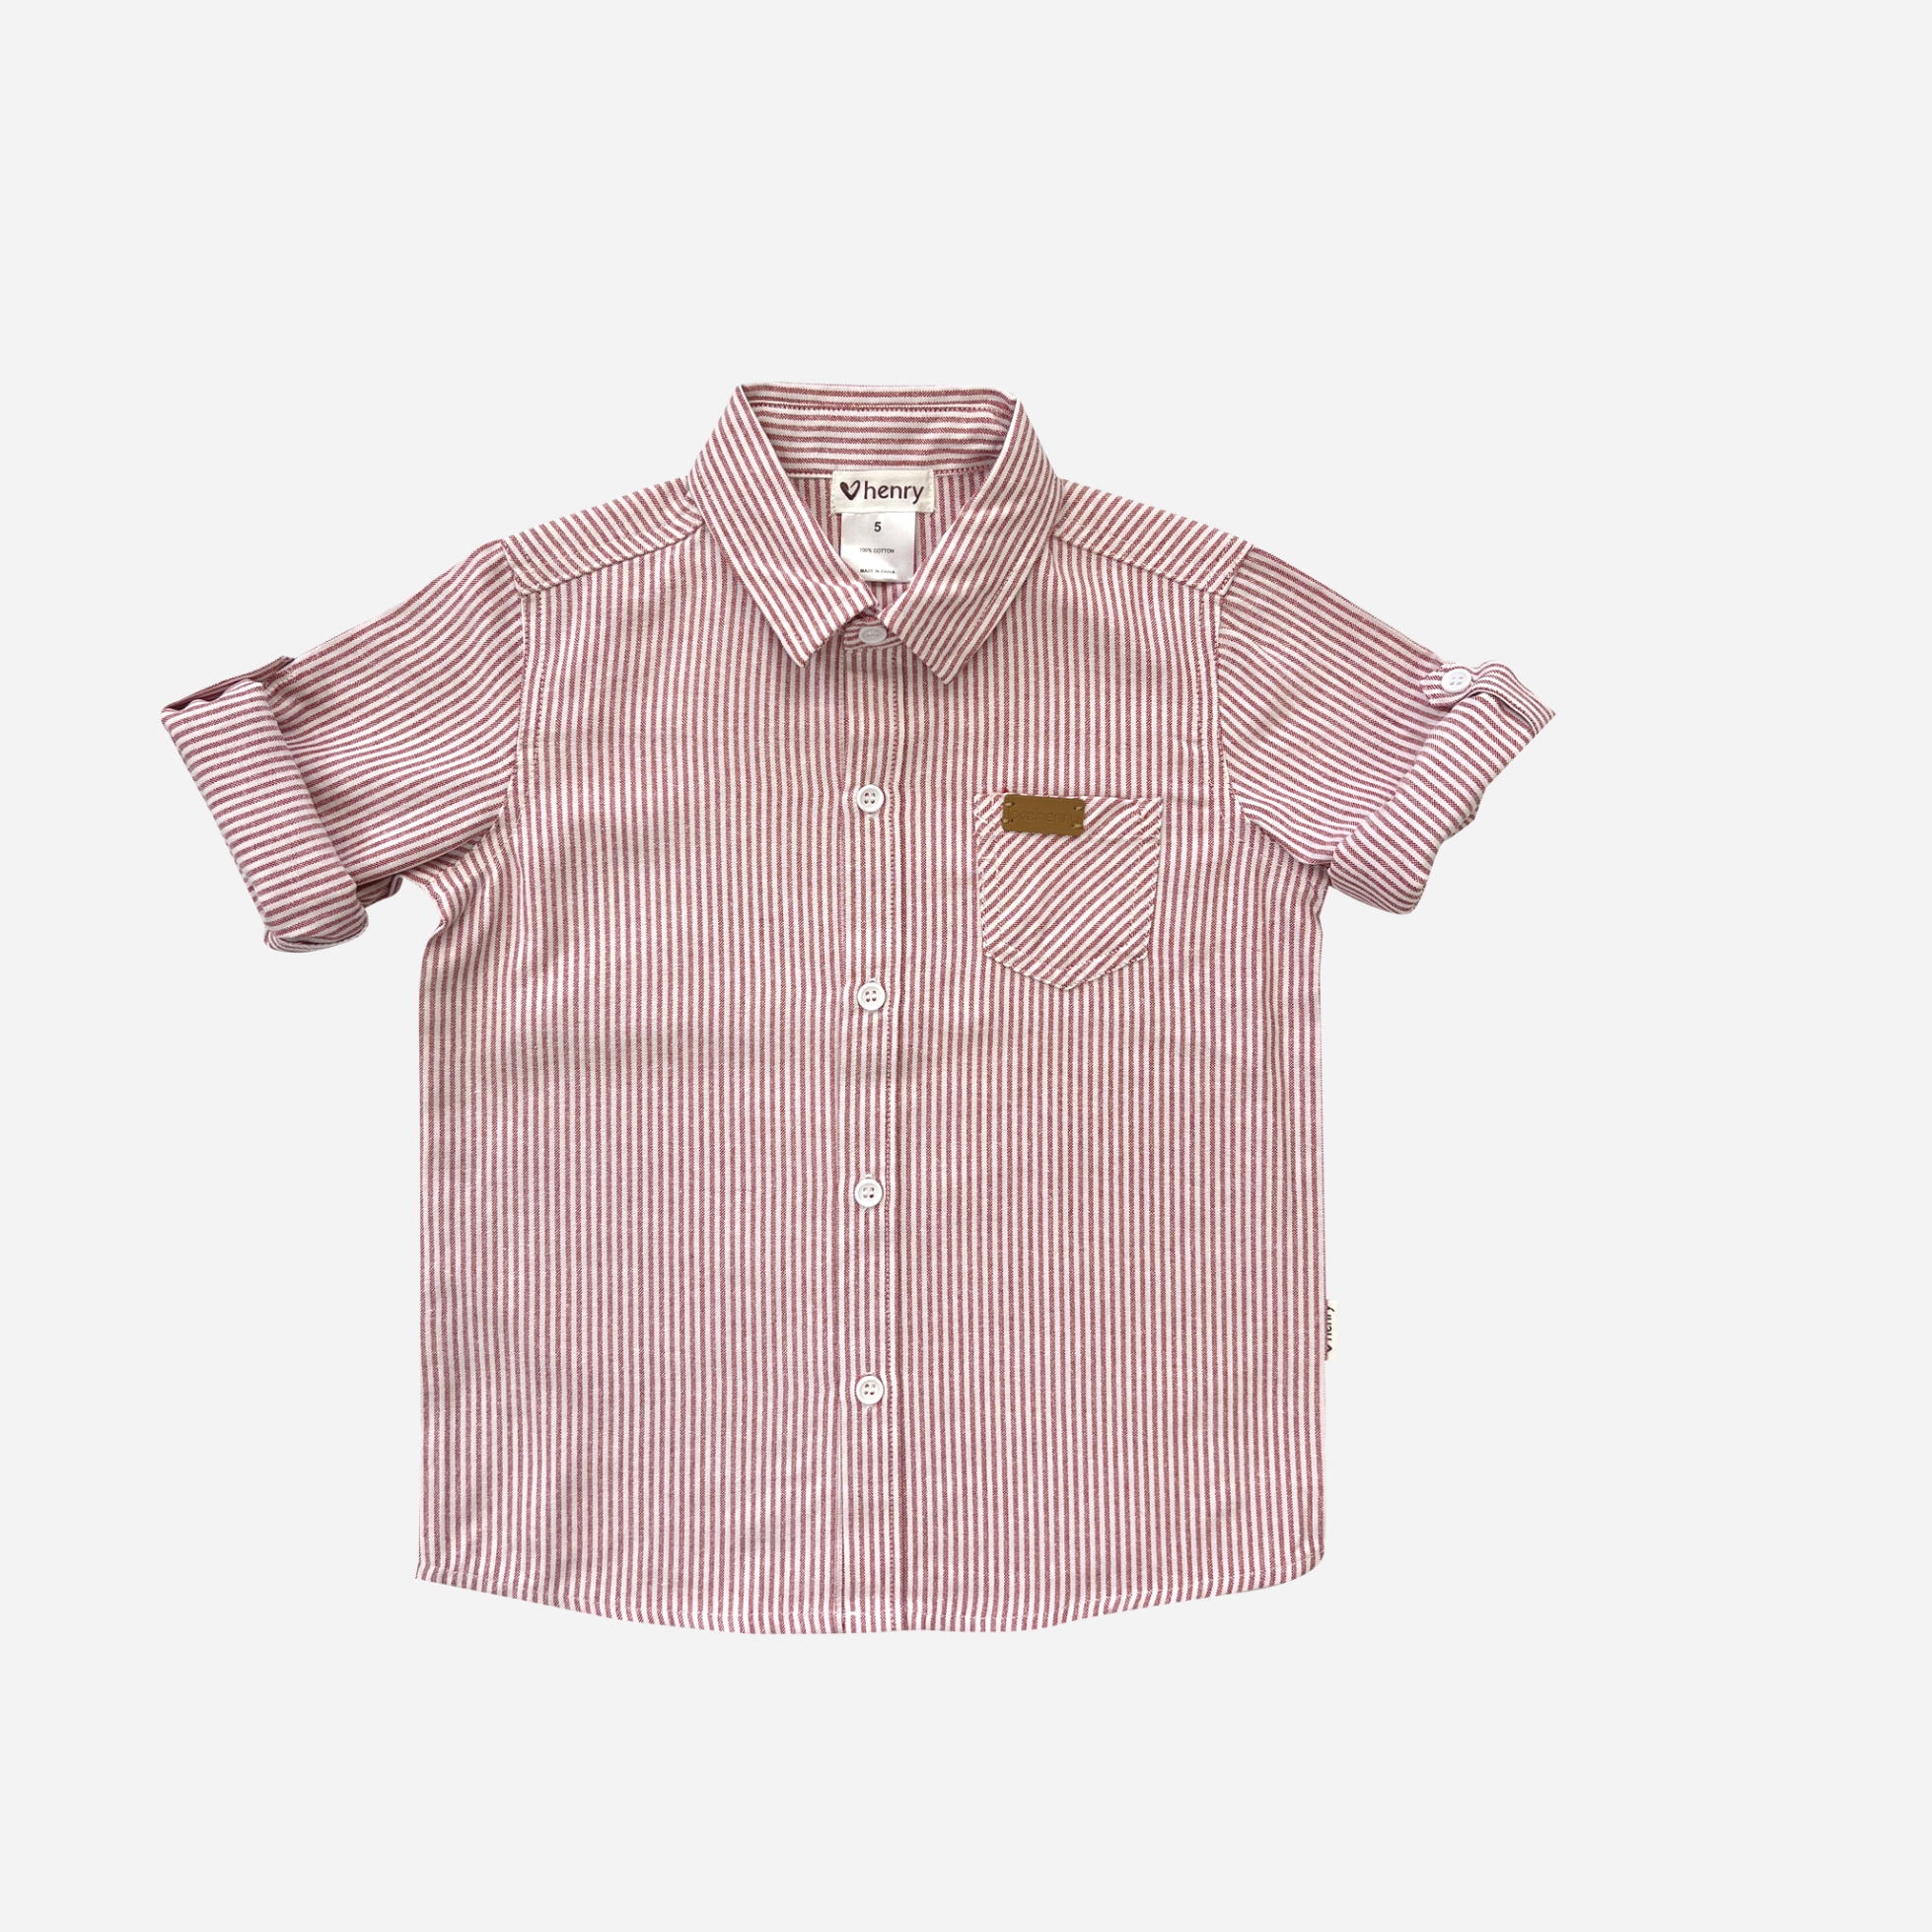 boys dress shirt - angus and dudley